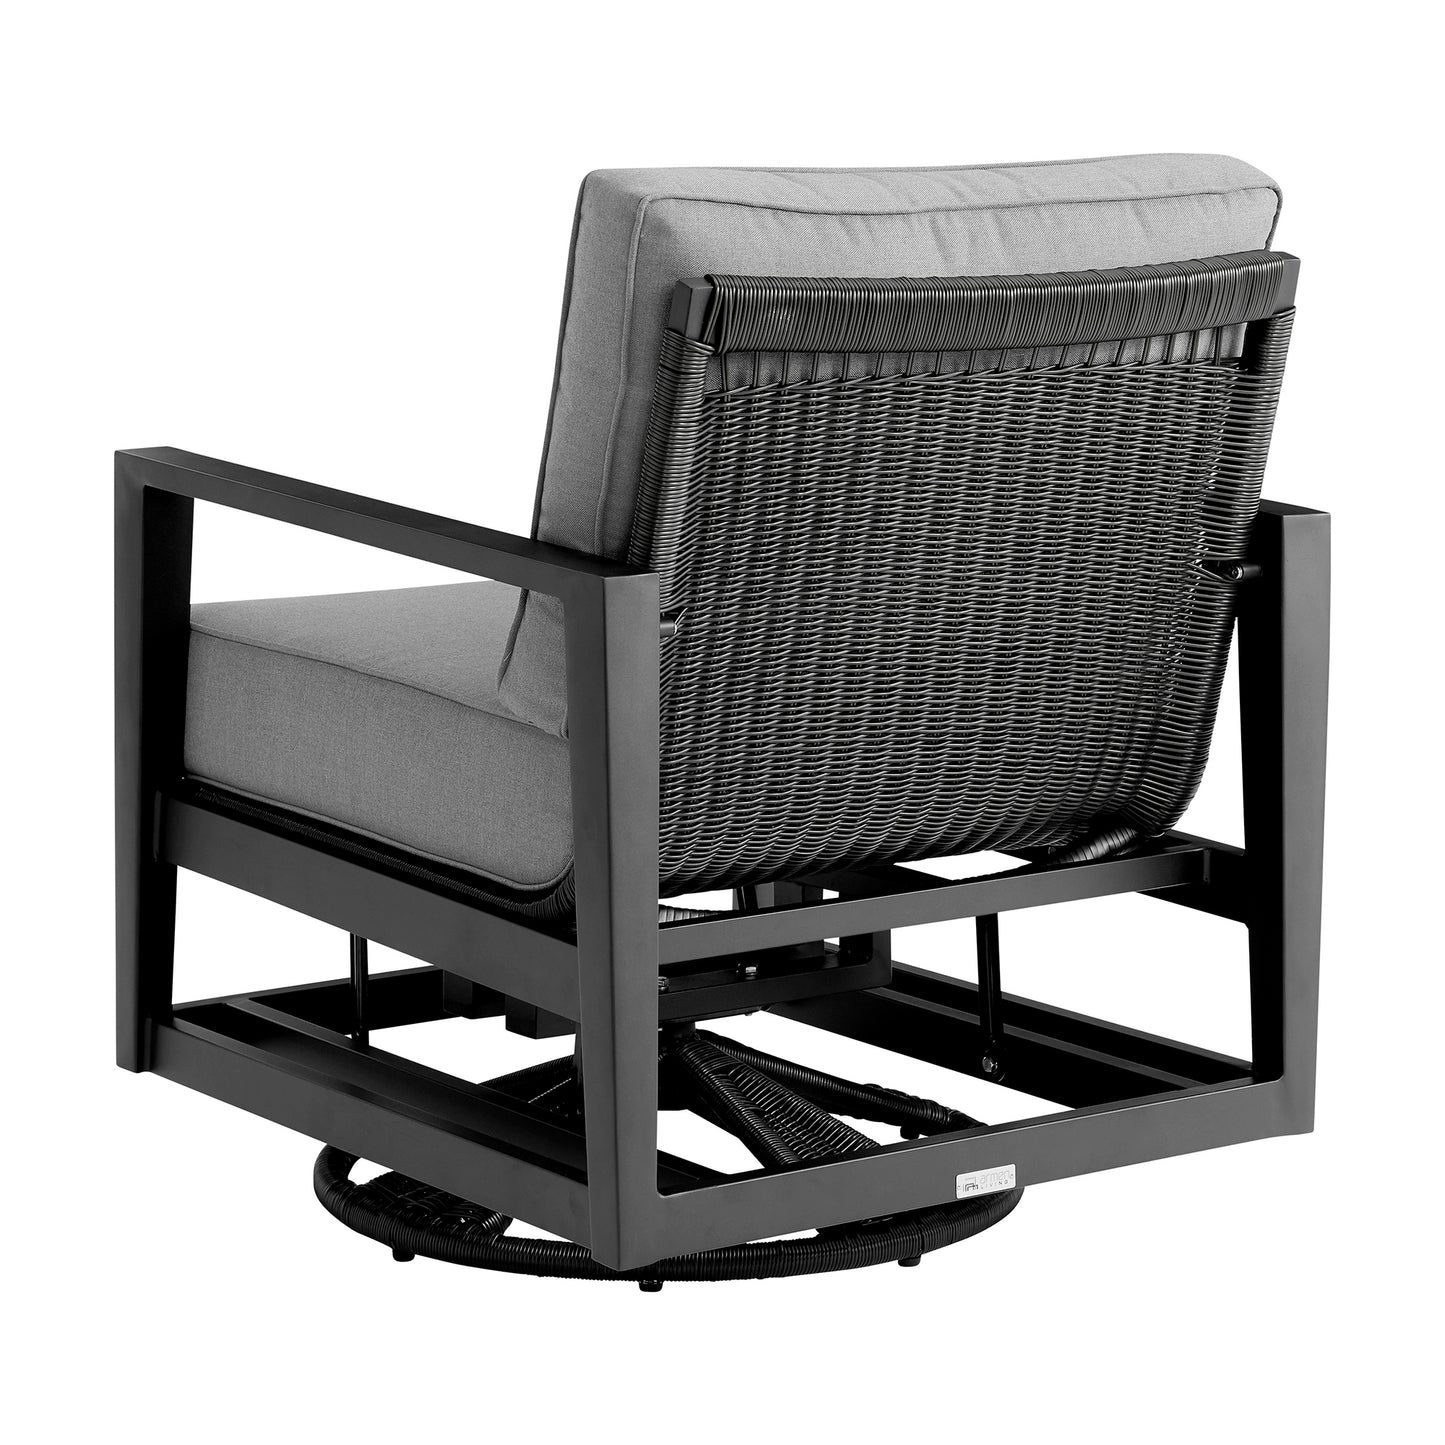 Cayman 5 Piece Black Aluminum Outdoor Seating Set with Dark Gray Cushions